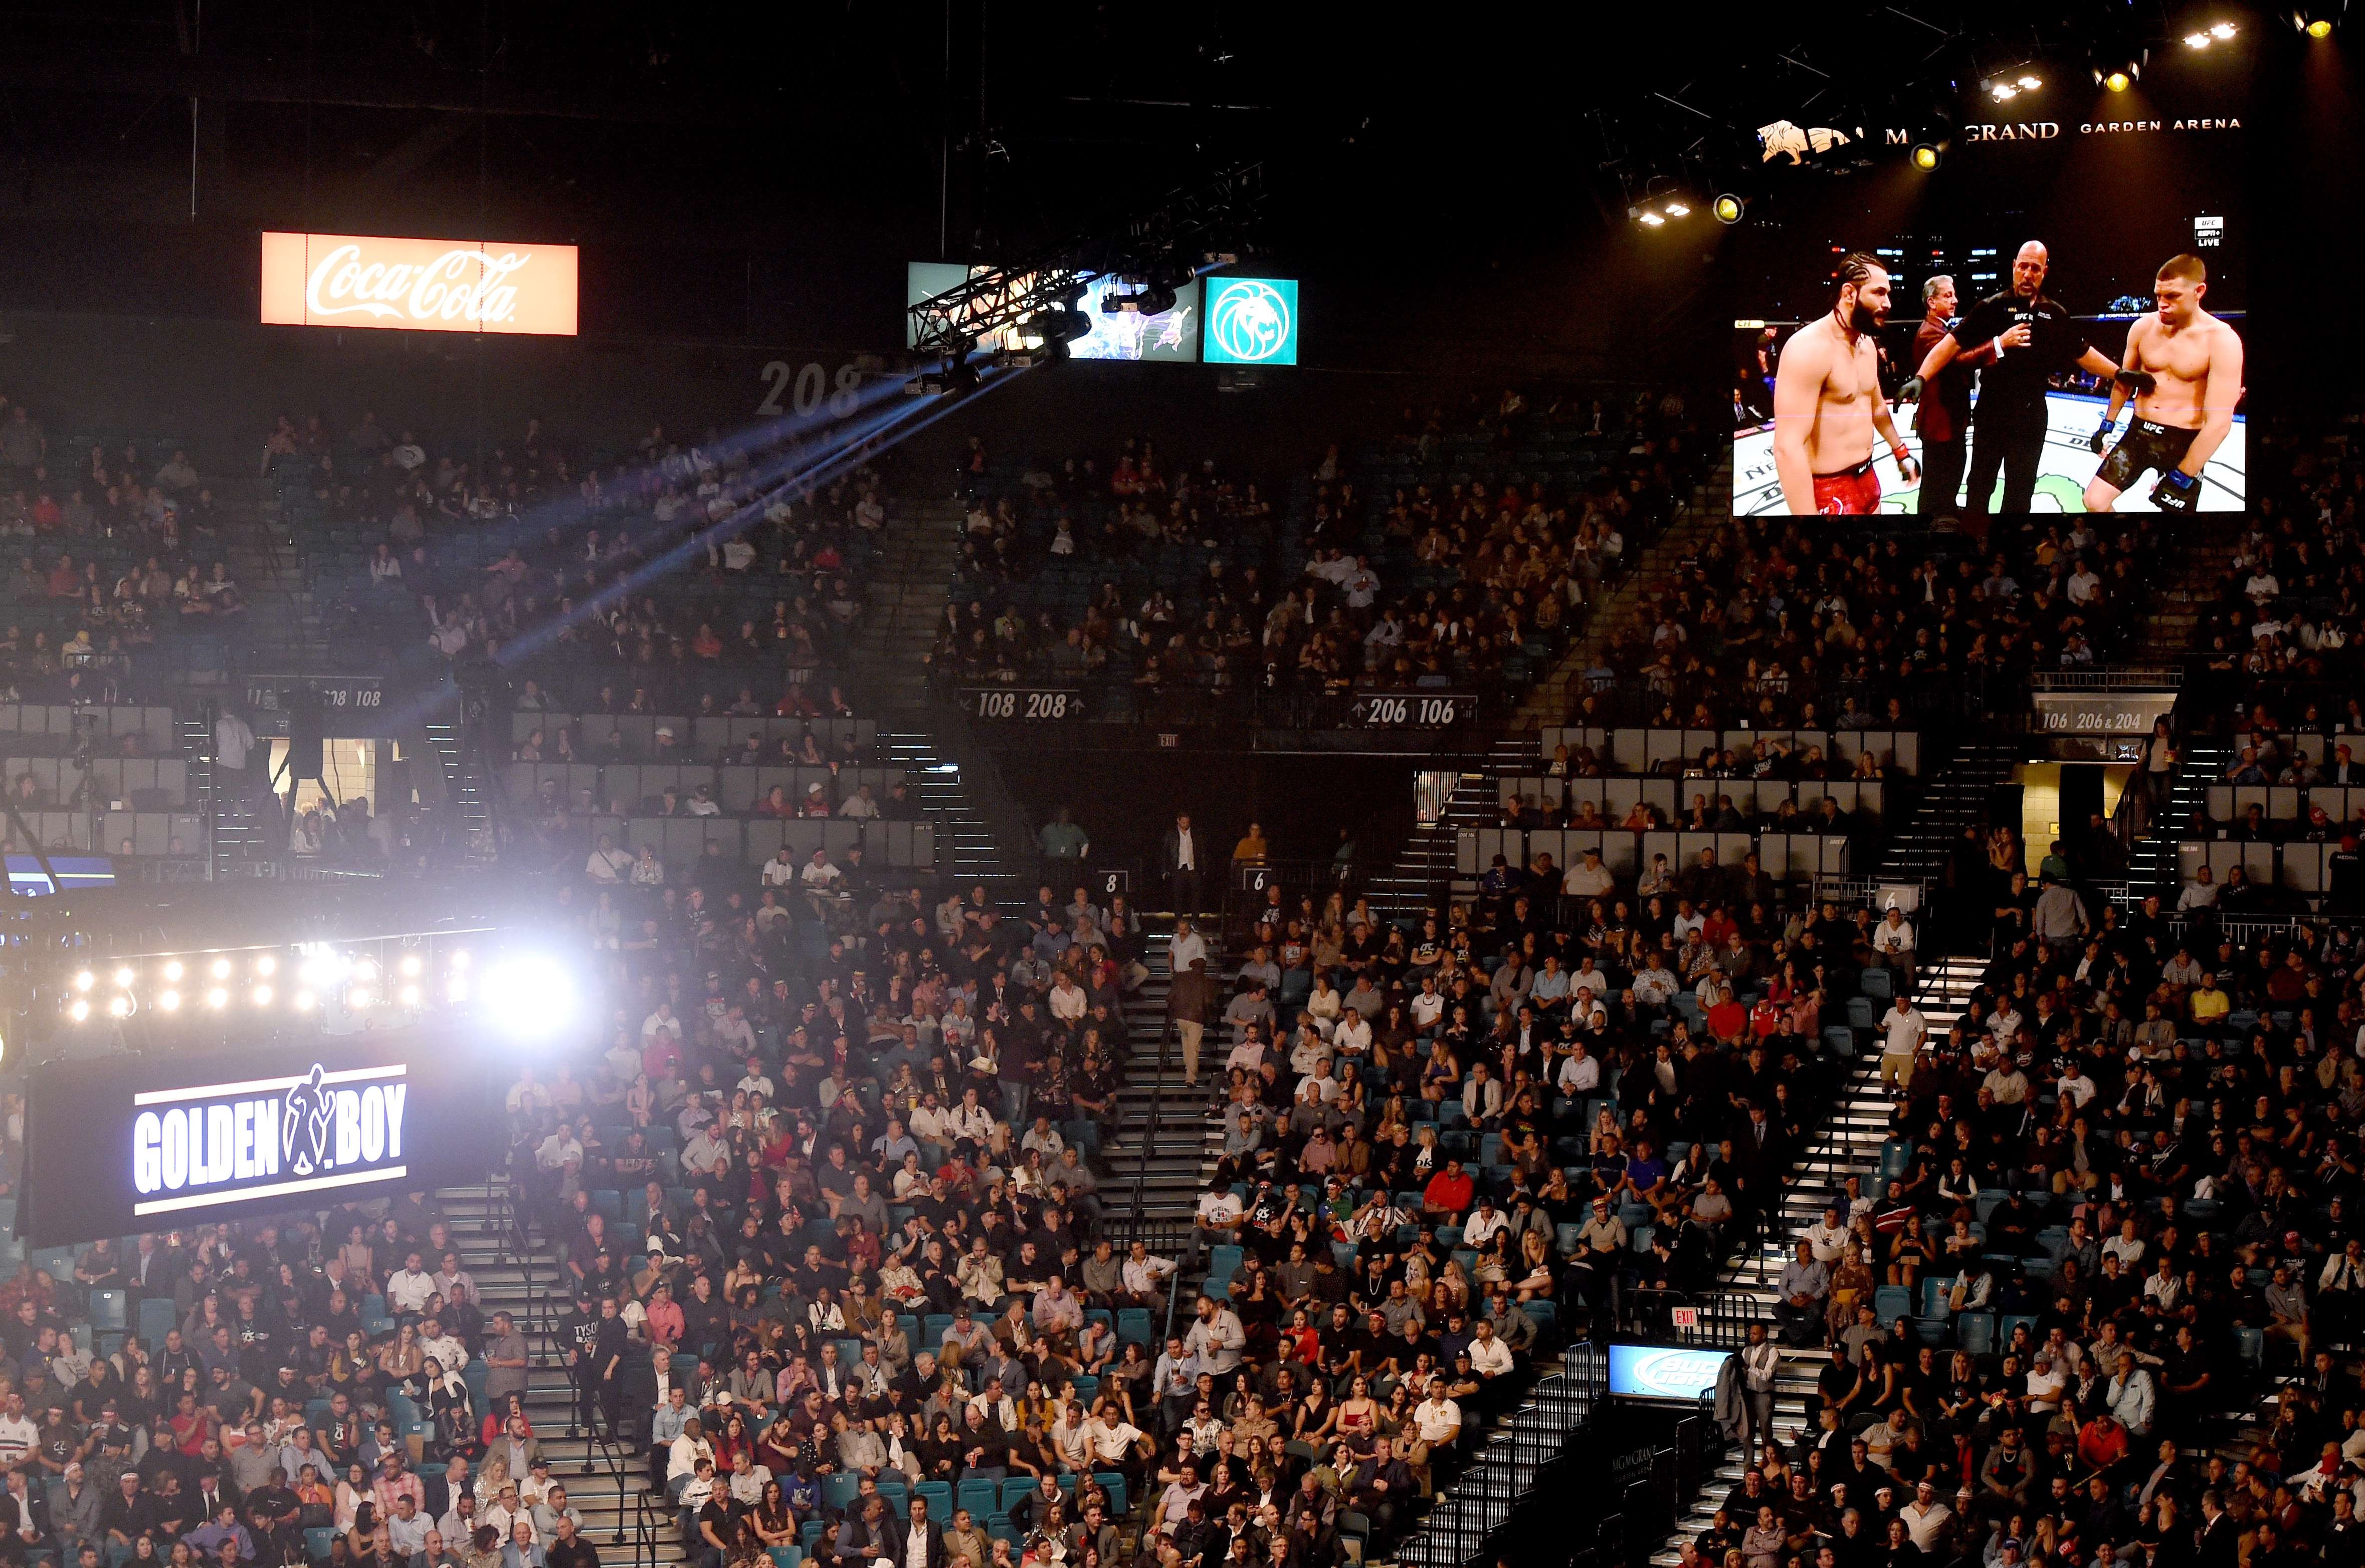 The UFC 244 welterweight bout between Jorge Masvidal and Nate Diaz is shown on screens at MGM Grand Garden Arena. Photo: AFP